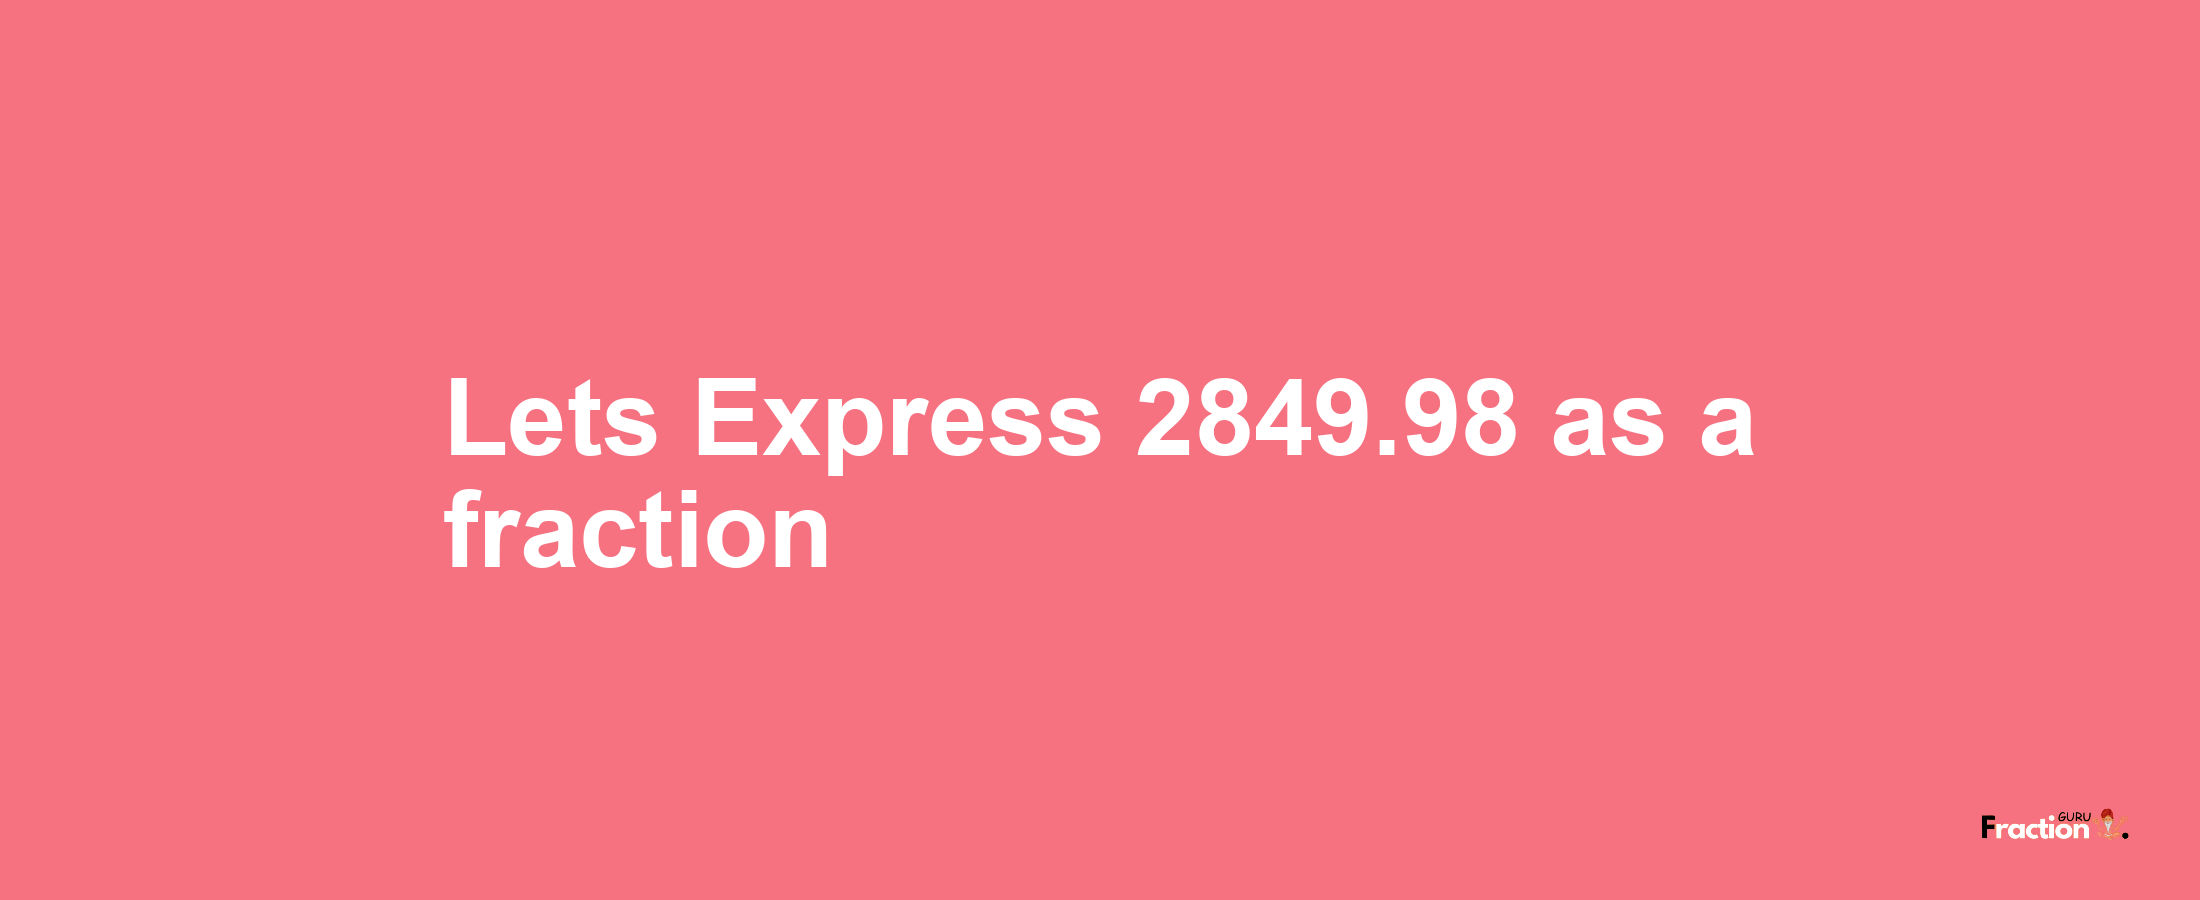 Lets Express 2849.98 as afraction